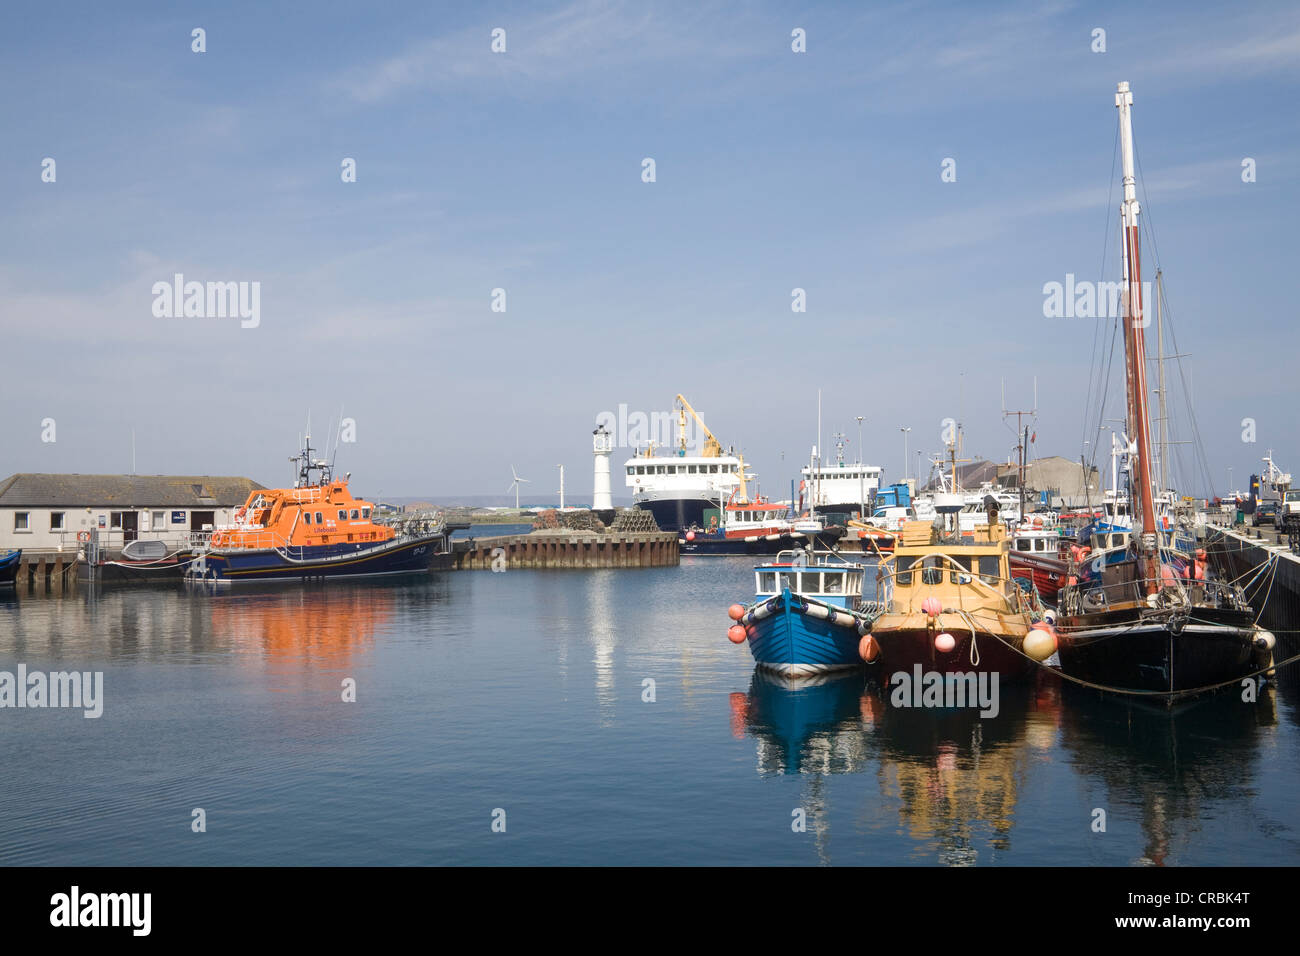 Kirkwall Orkney Islands Mainland Scotland UK May Fishing boats and lifeboat in this capital town's harbour Stock Photo